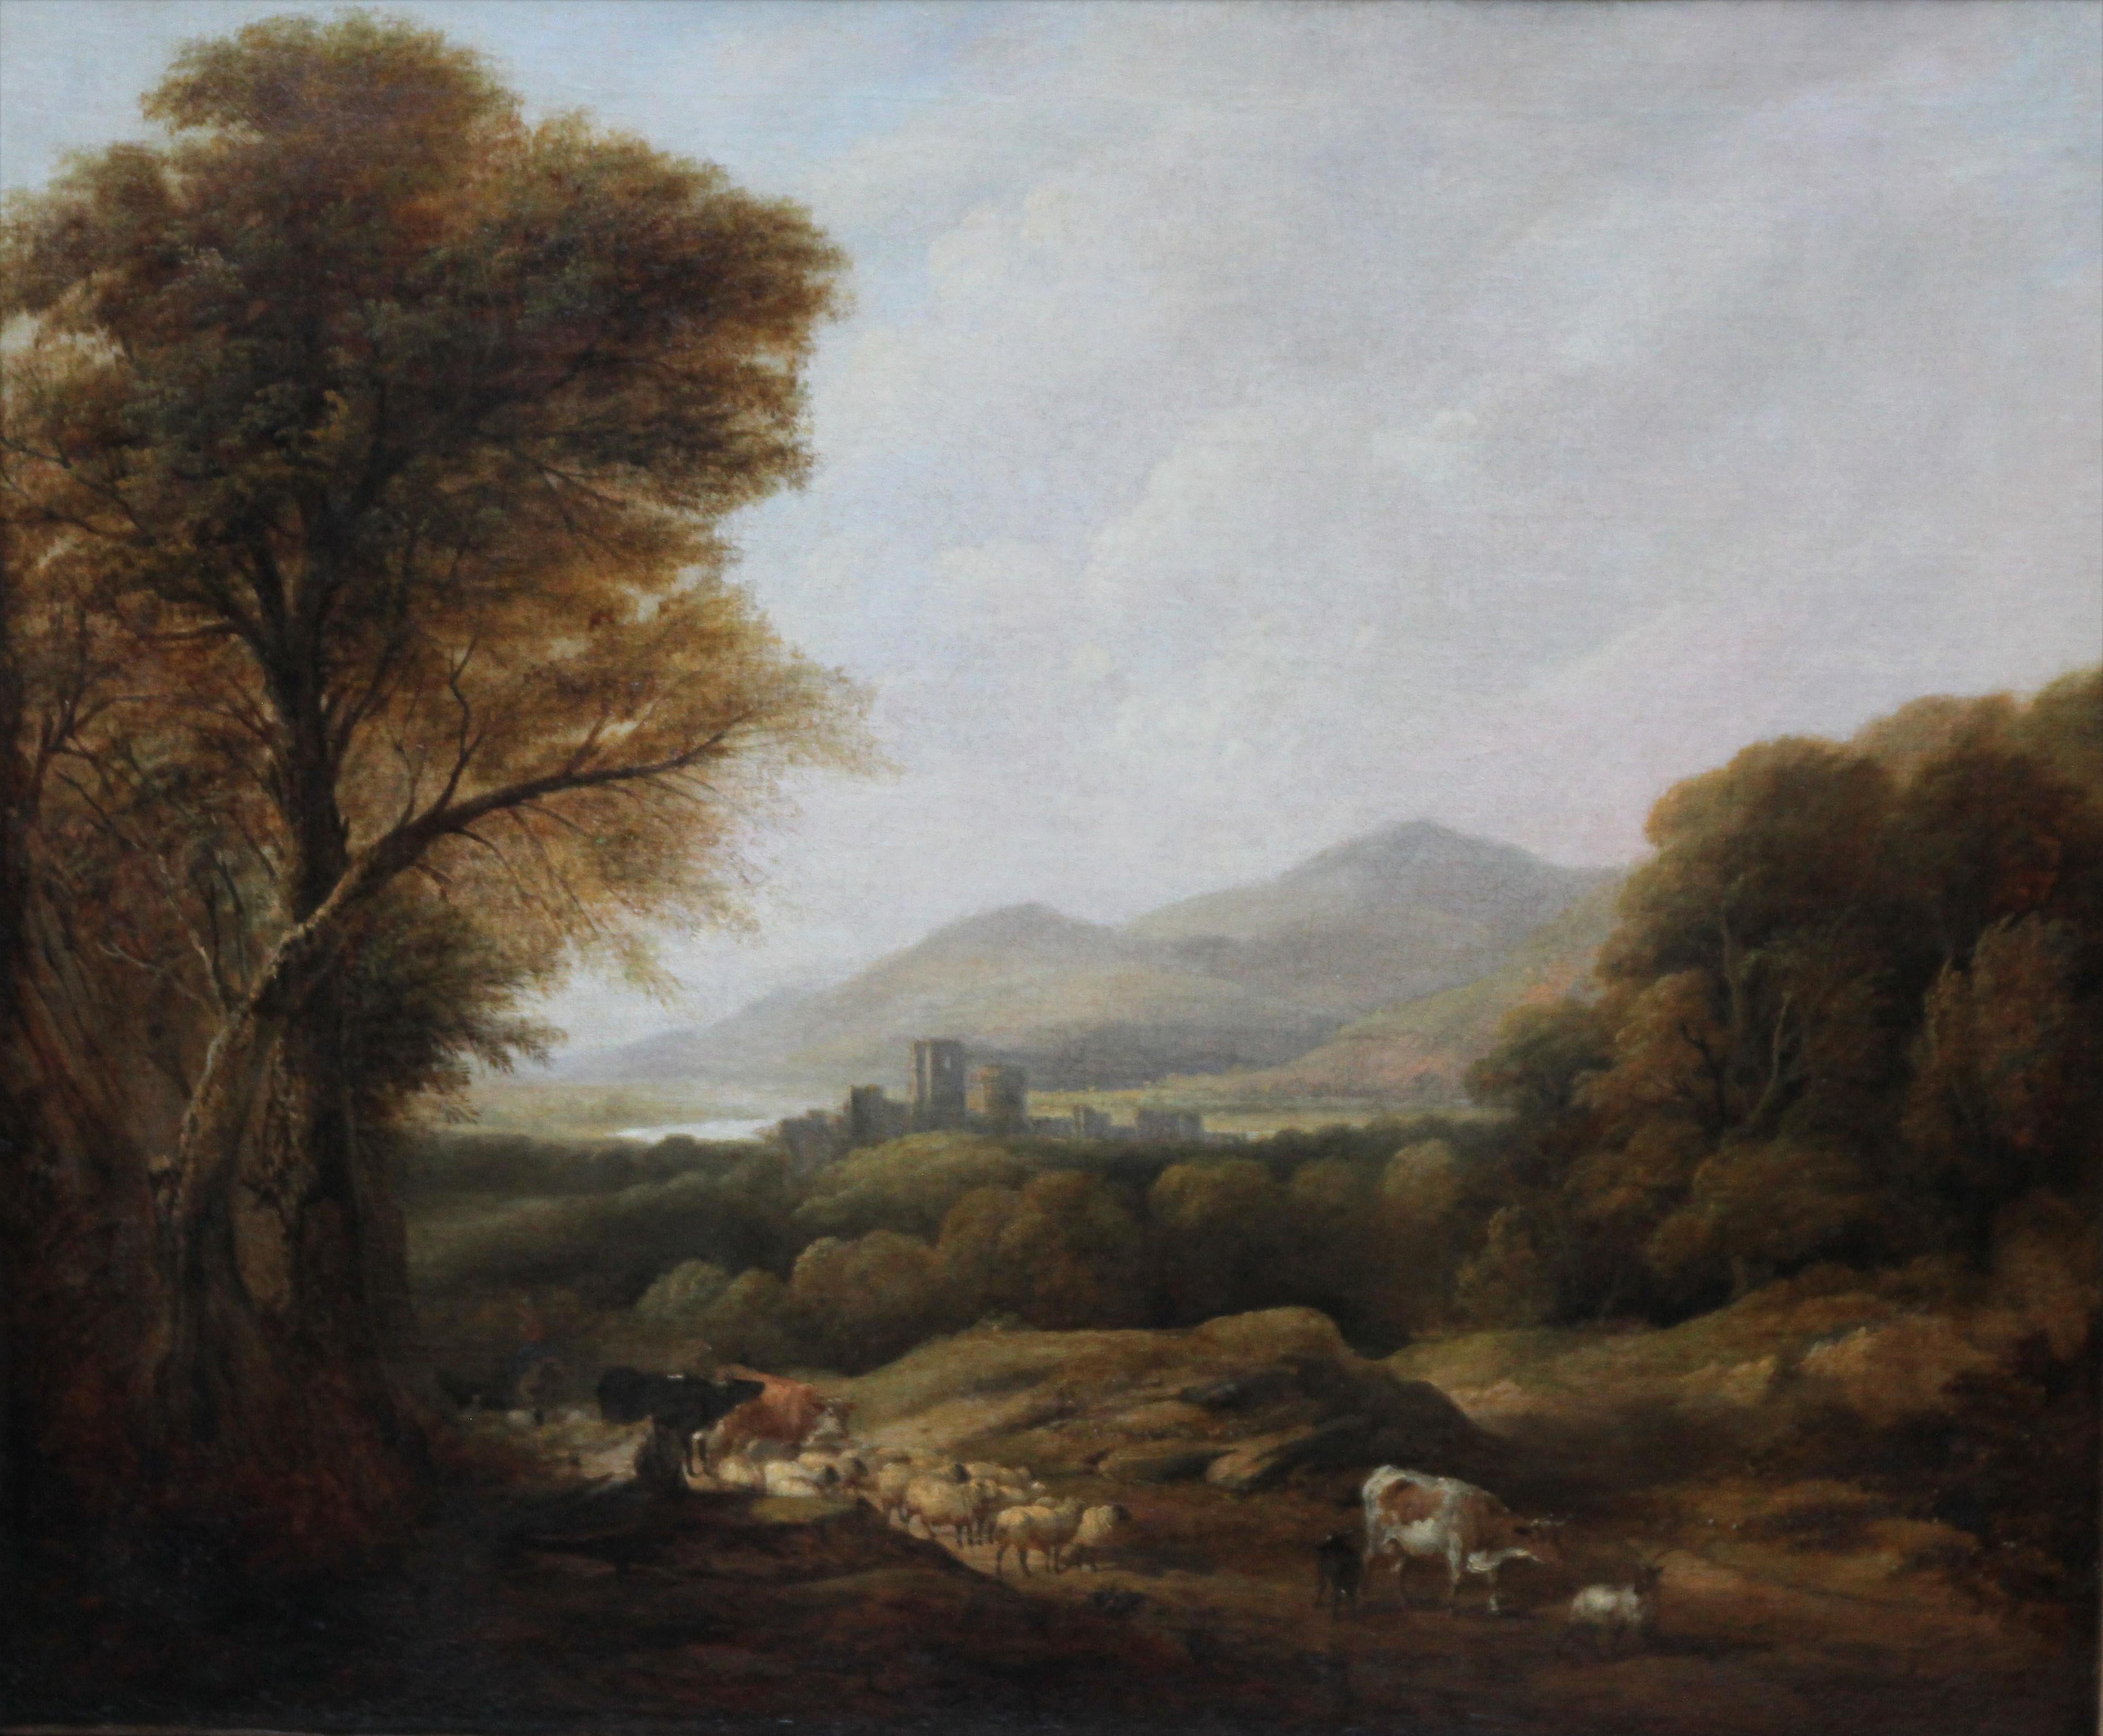 Cattle and Drover in a Landscape - British Victorian art landscape oil painting - Painting by Henry Jutsum 